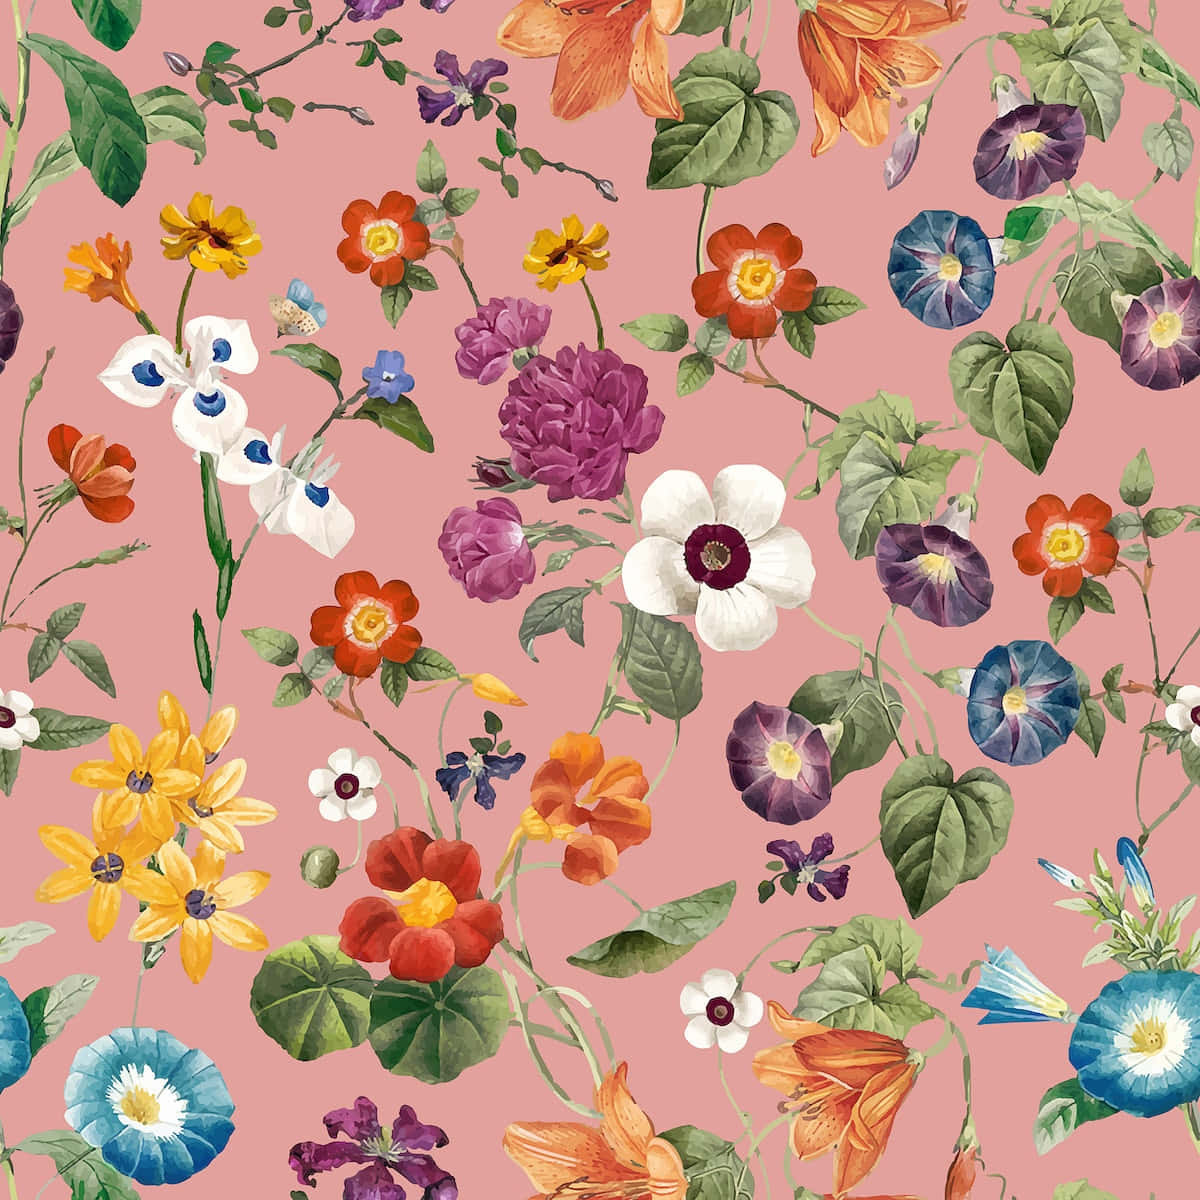 A beautiful, colorful floral patterned background.